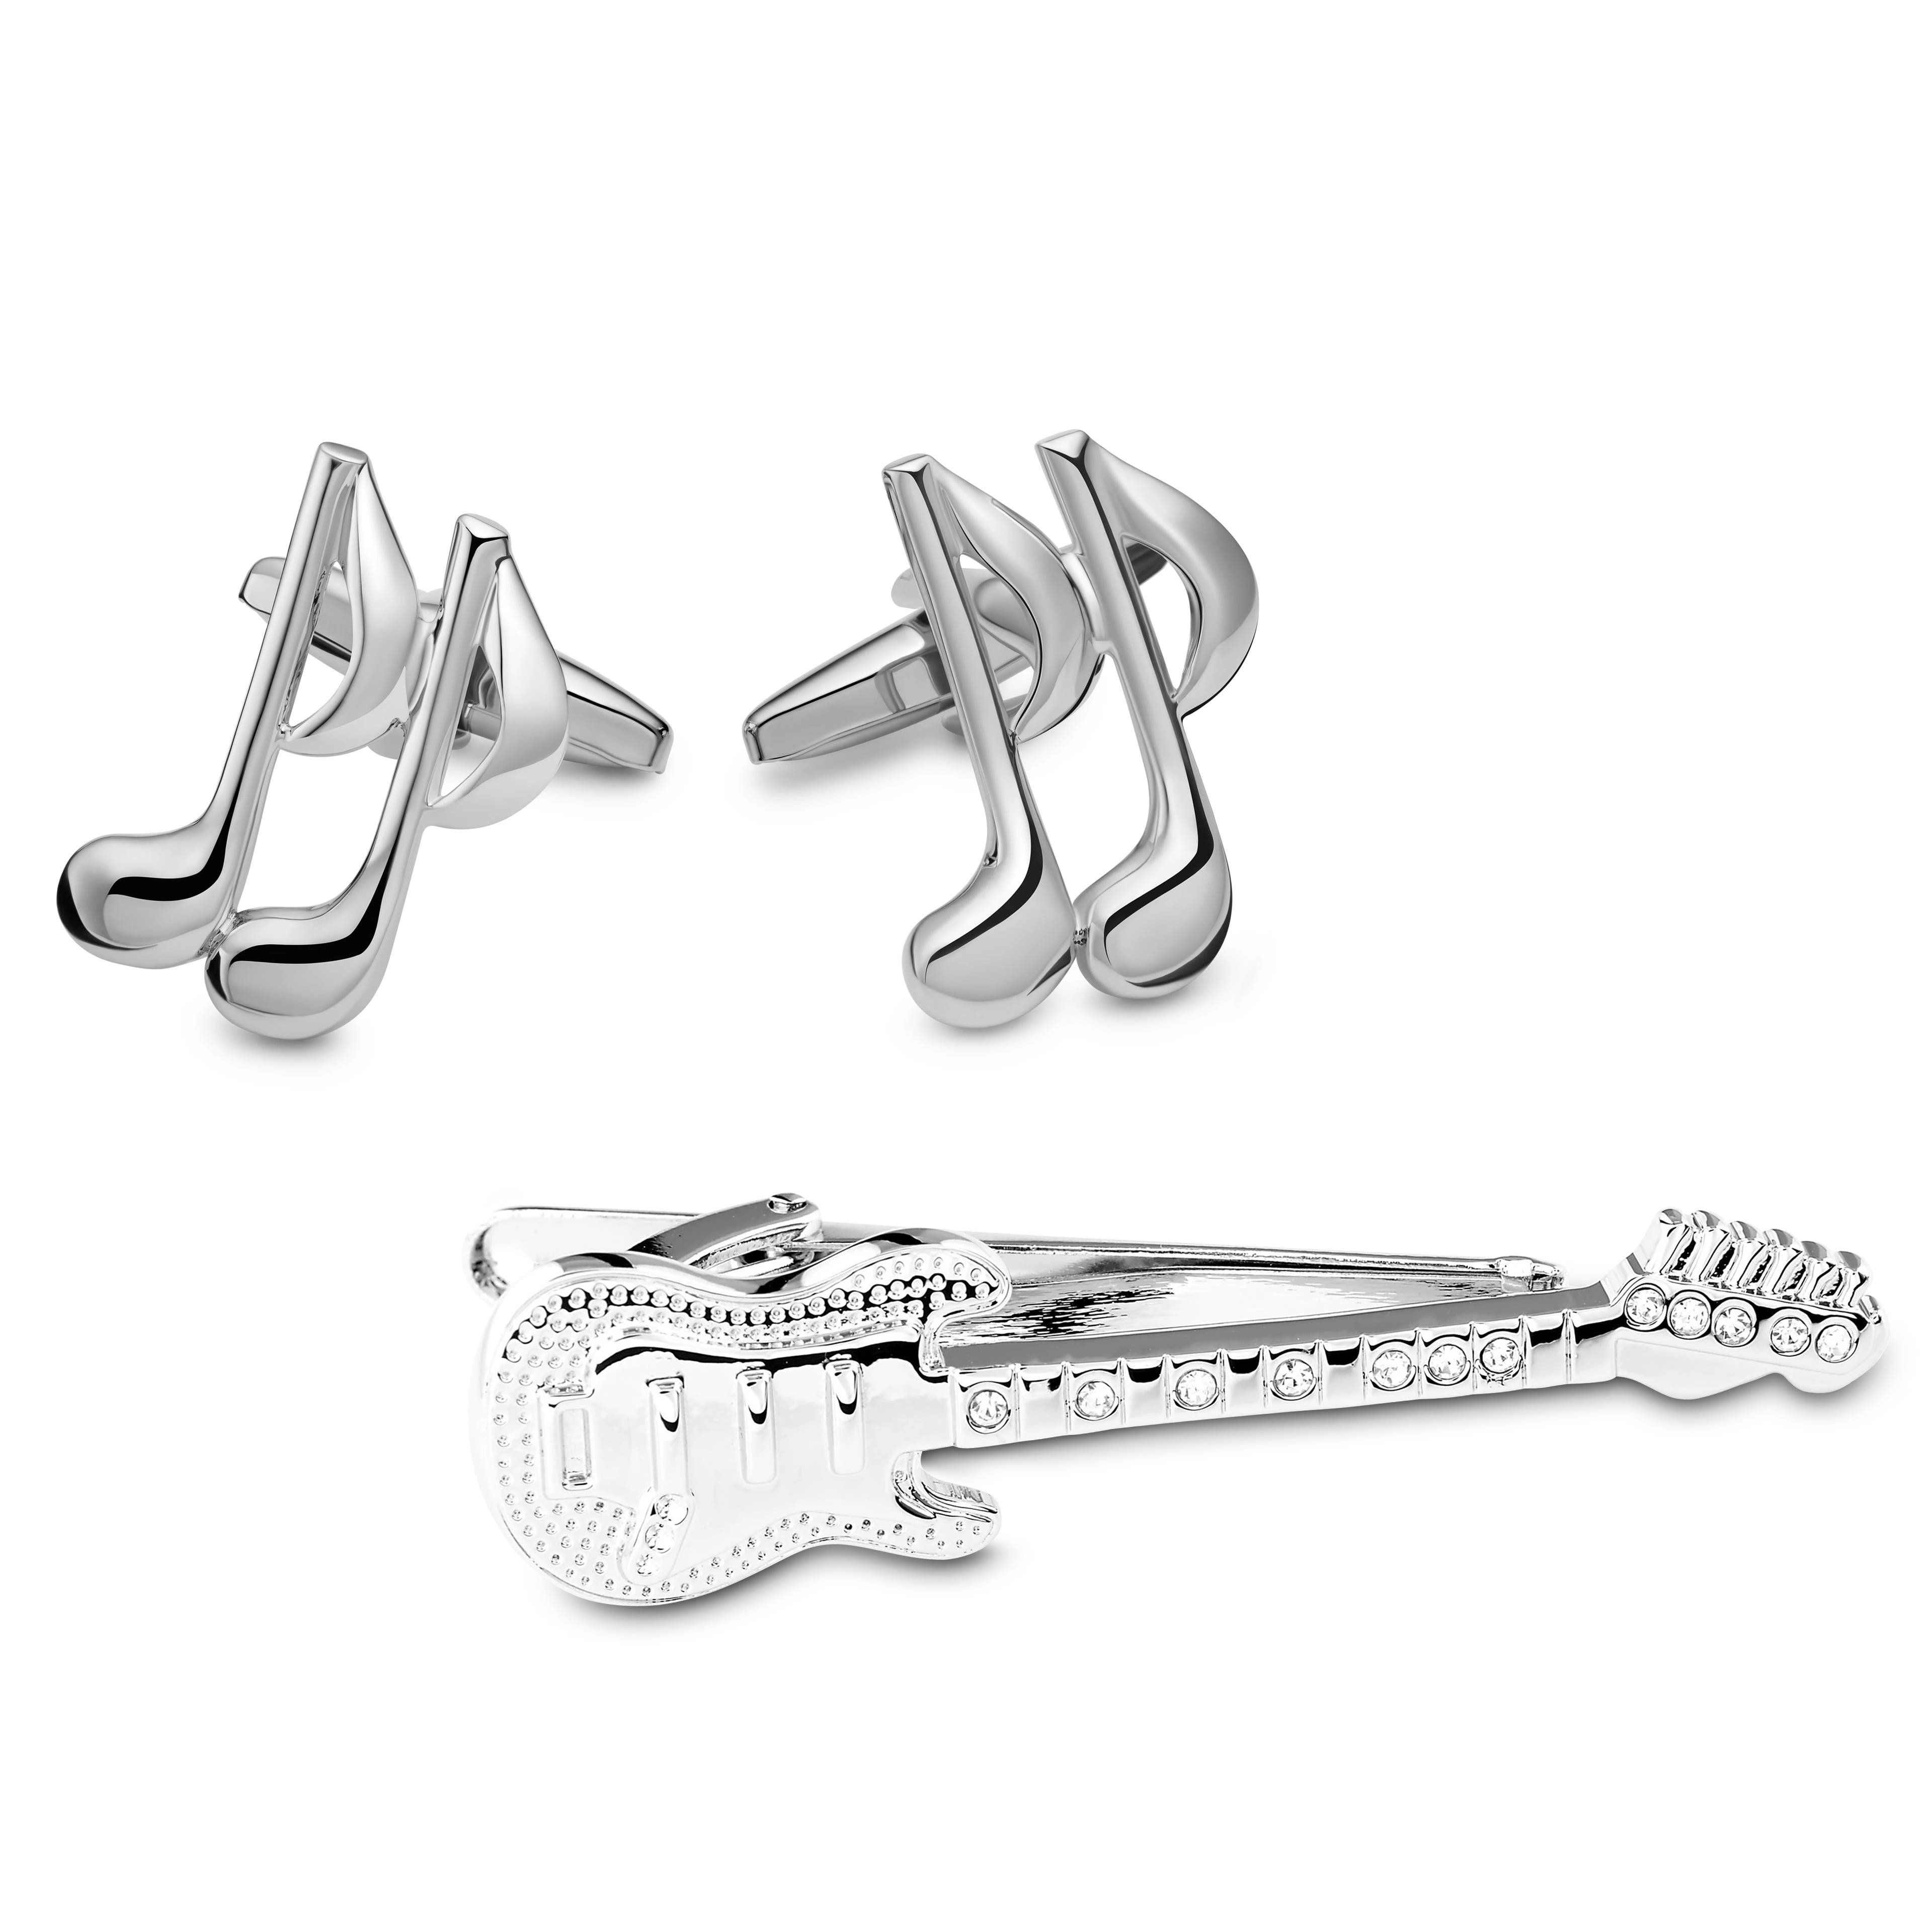 Silver-Tone Guitar Tie Clip and Notes Cufflinks Set